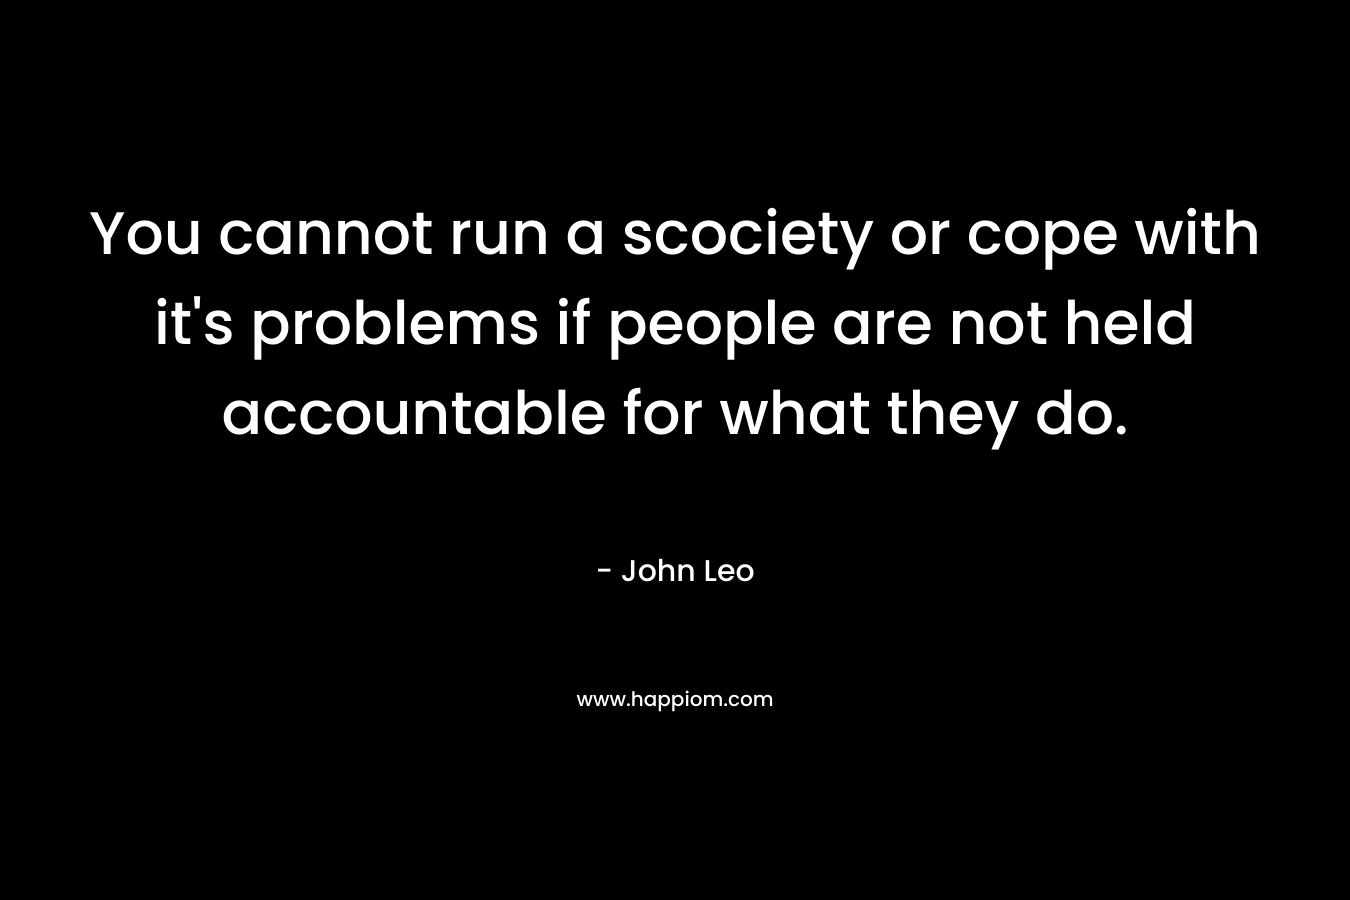 You cannot run a scociety or cope with it's problems if people are not held accountable for what they do.